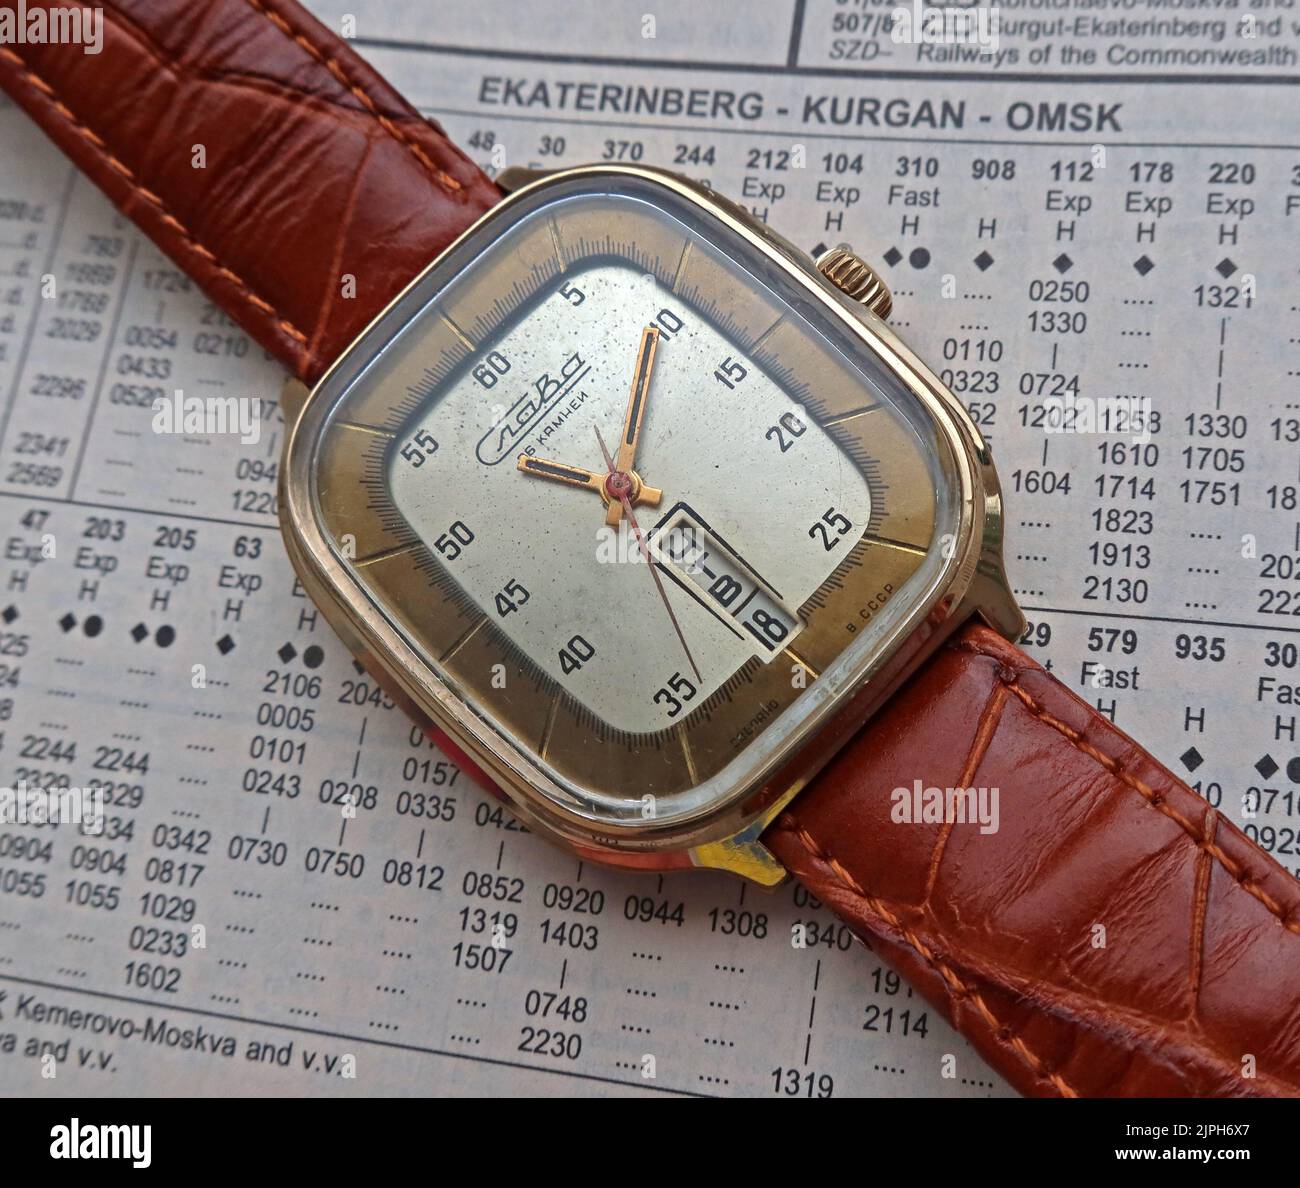 Slava Fridge watch - Product of the Soviet Russia Moscow Second watch factory 1975, with day/date in Russian Stock Photo